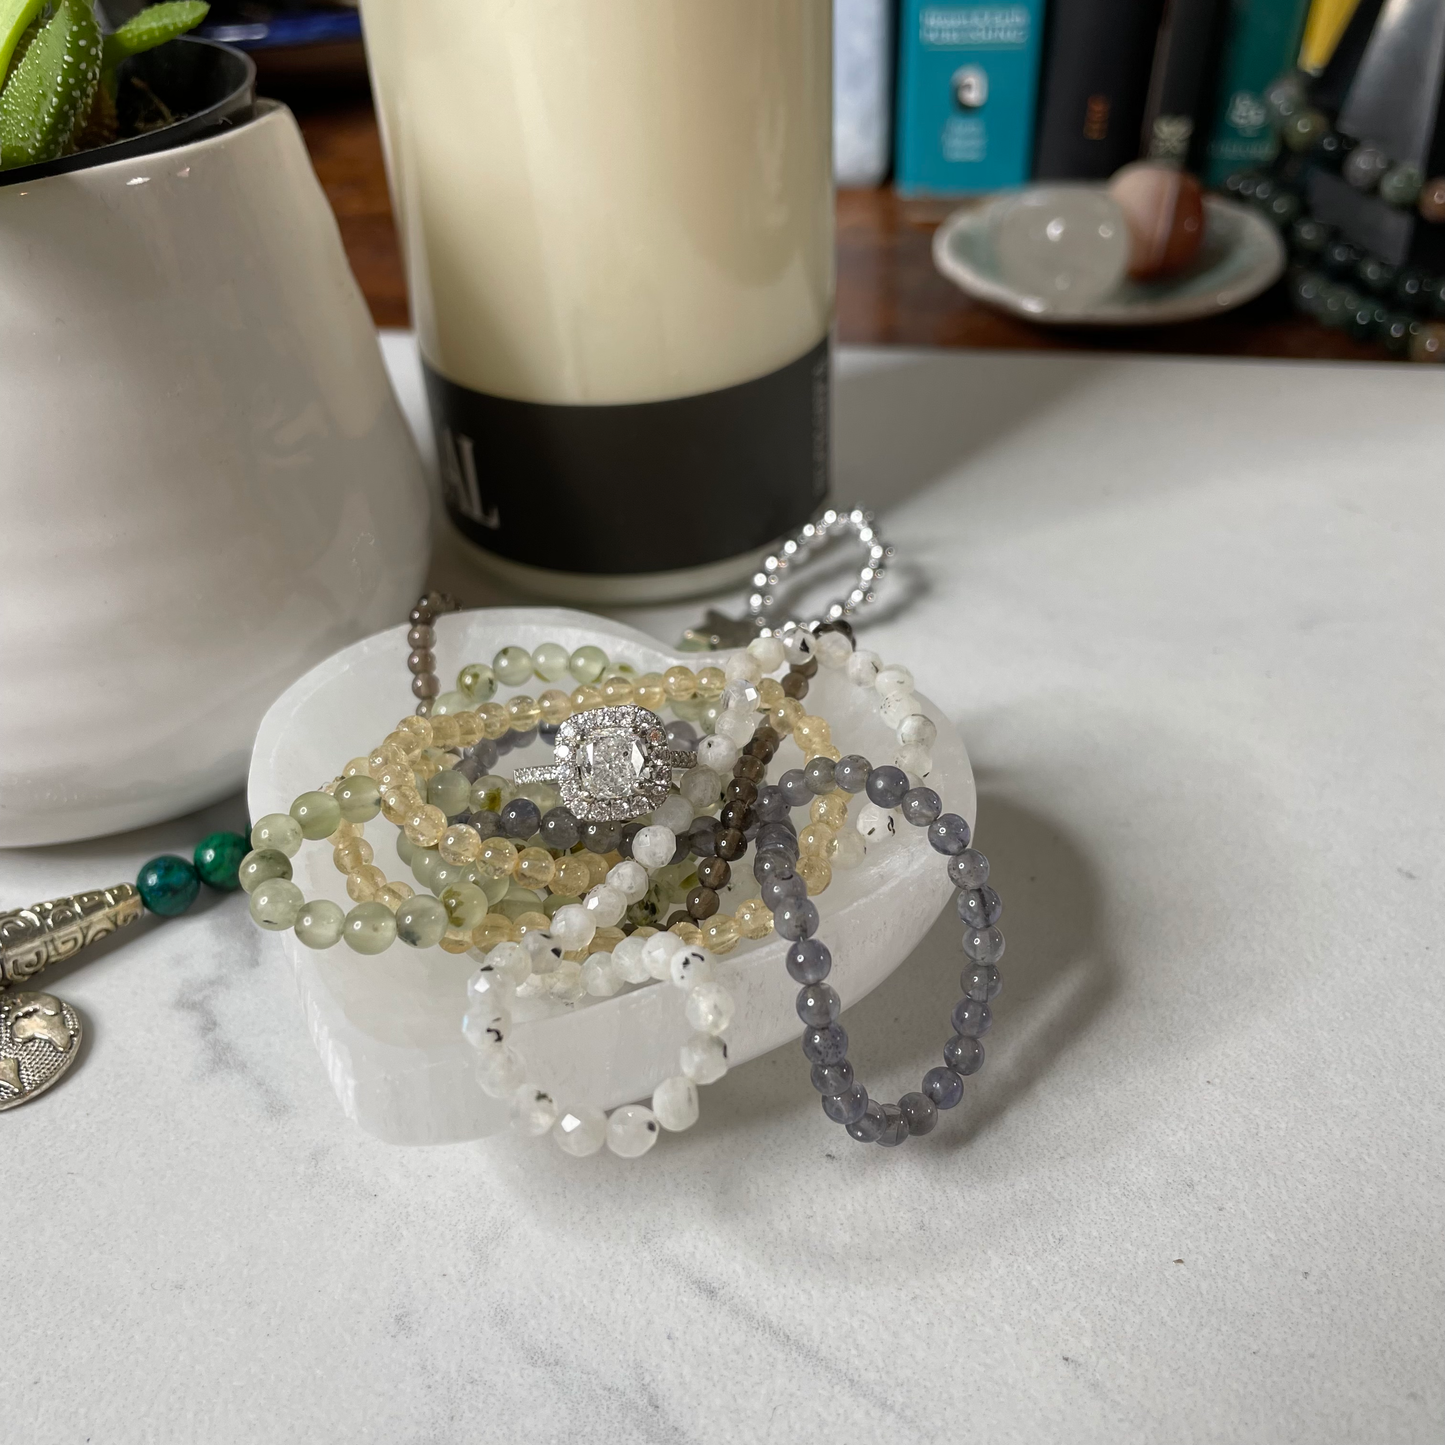 Freya's Haven | Metaphysical & Crystal shop | A  heart-shaped Selenite bowl is displayed with a succulent in a white pot, a goddess tea light candle holder with lit candle with a few crystal bracelets and diamond engagement ring displayed inside the bowl.